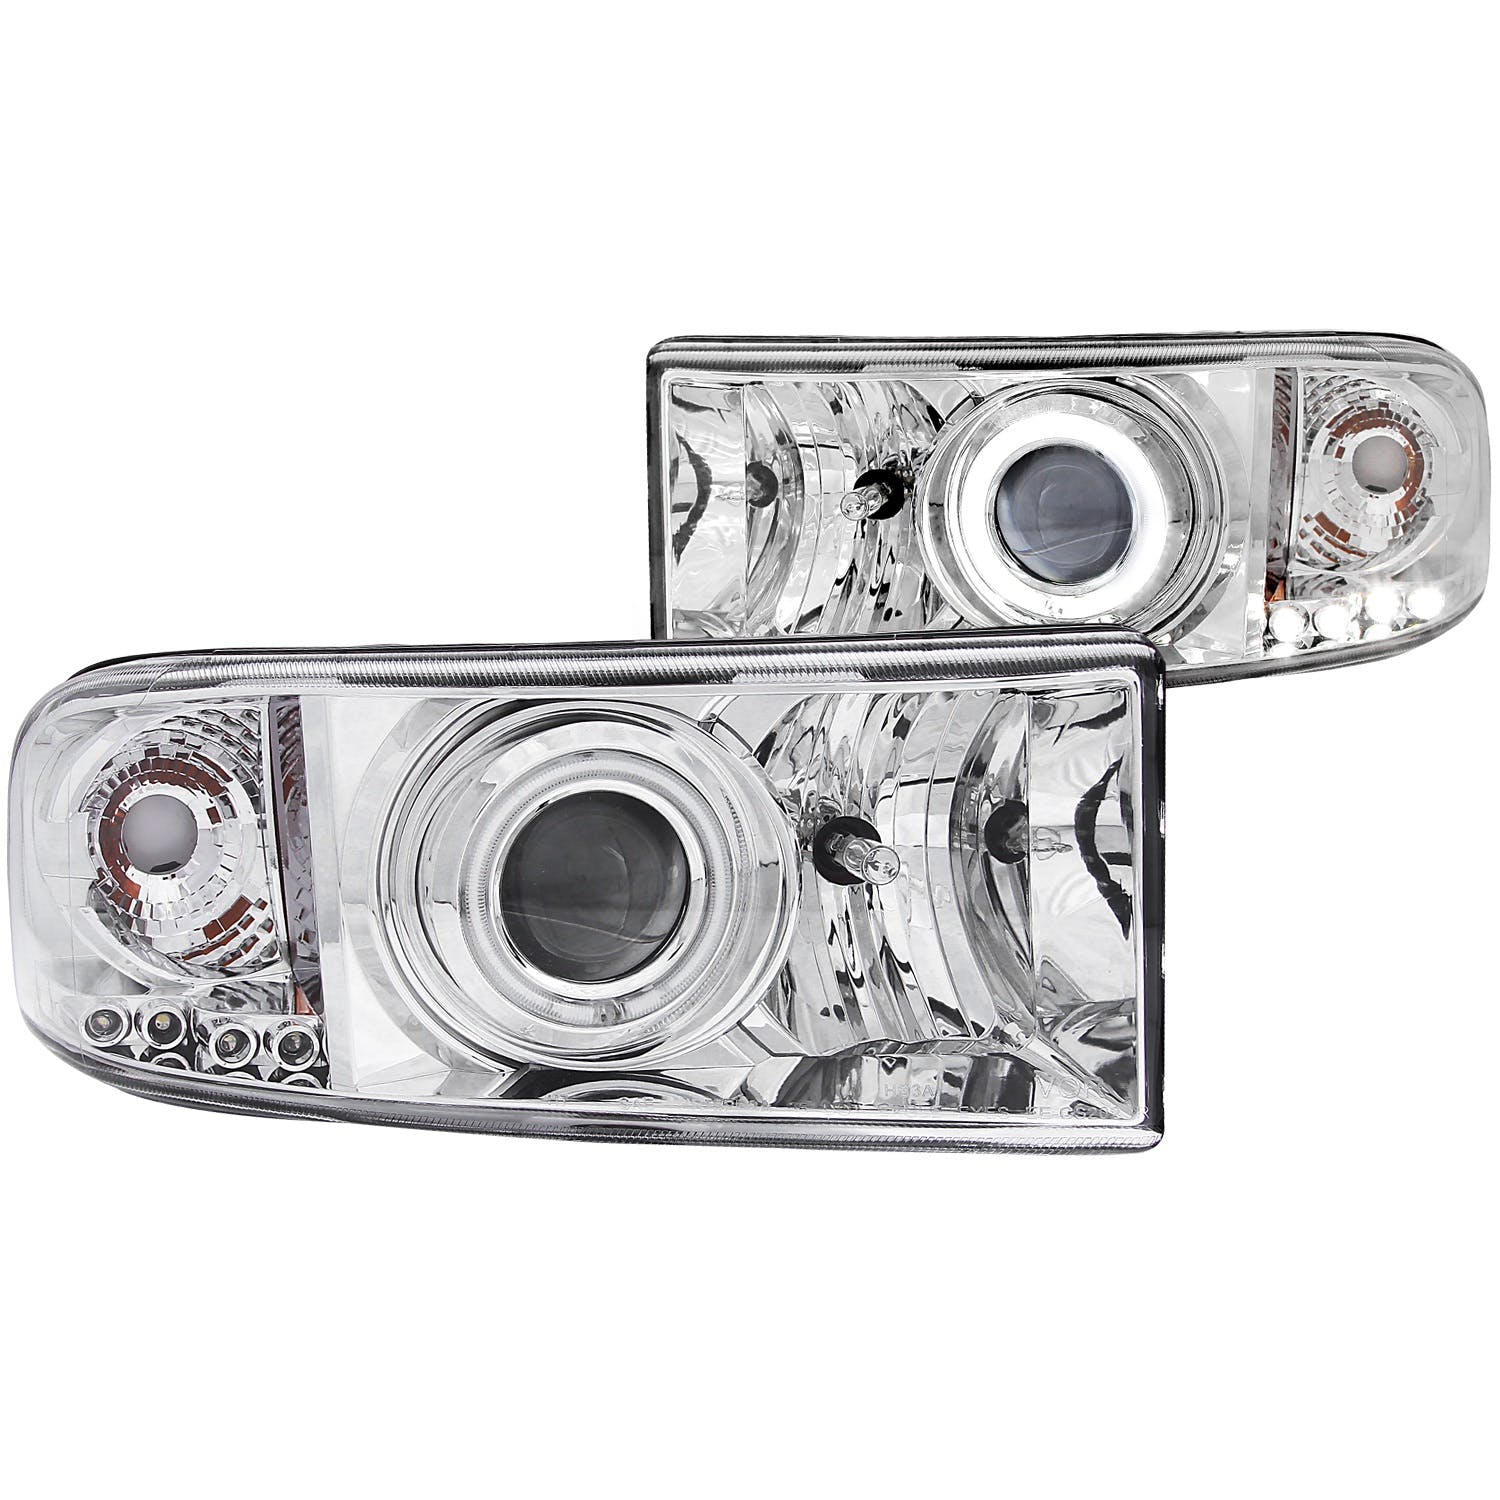 AnzoUSA 111056 Projector Headlights with Halo Chrome